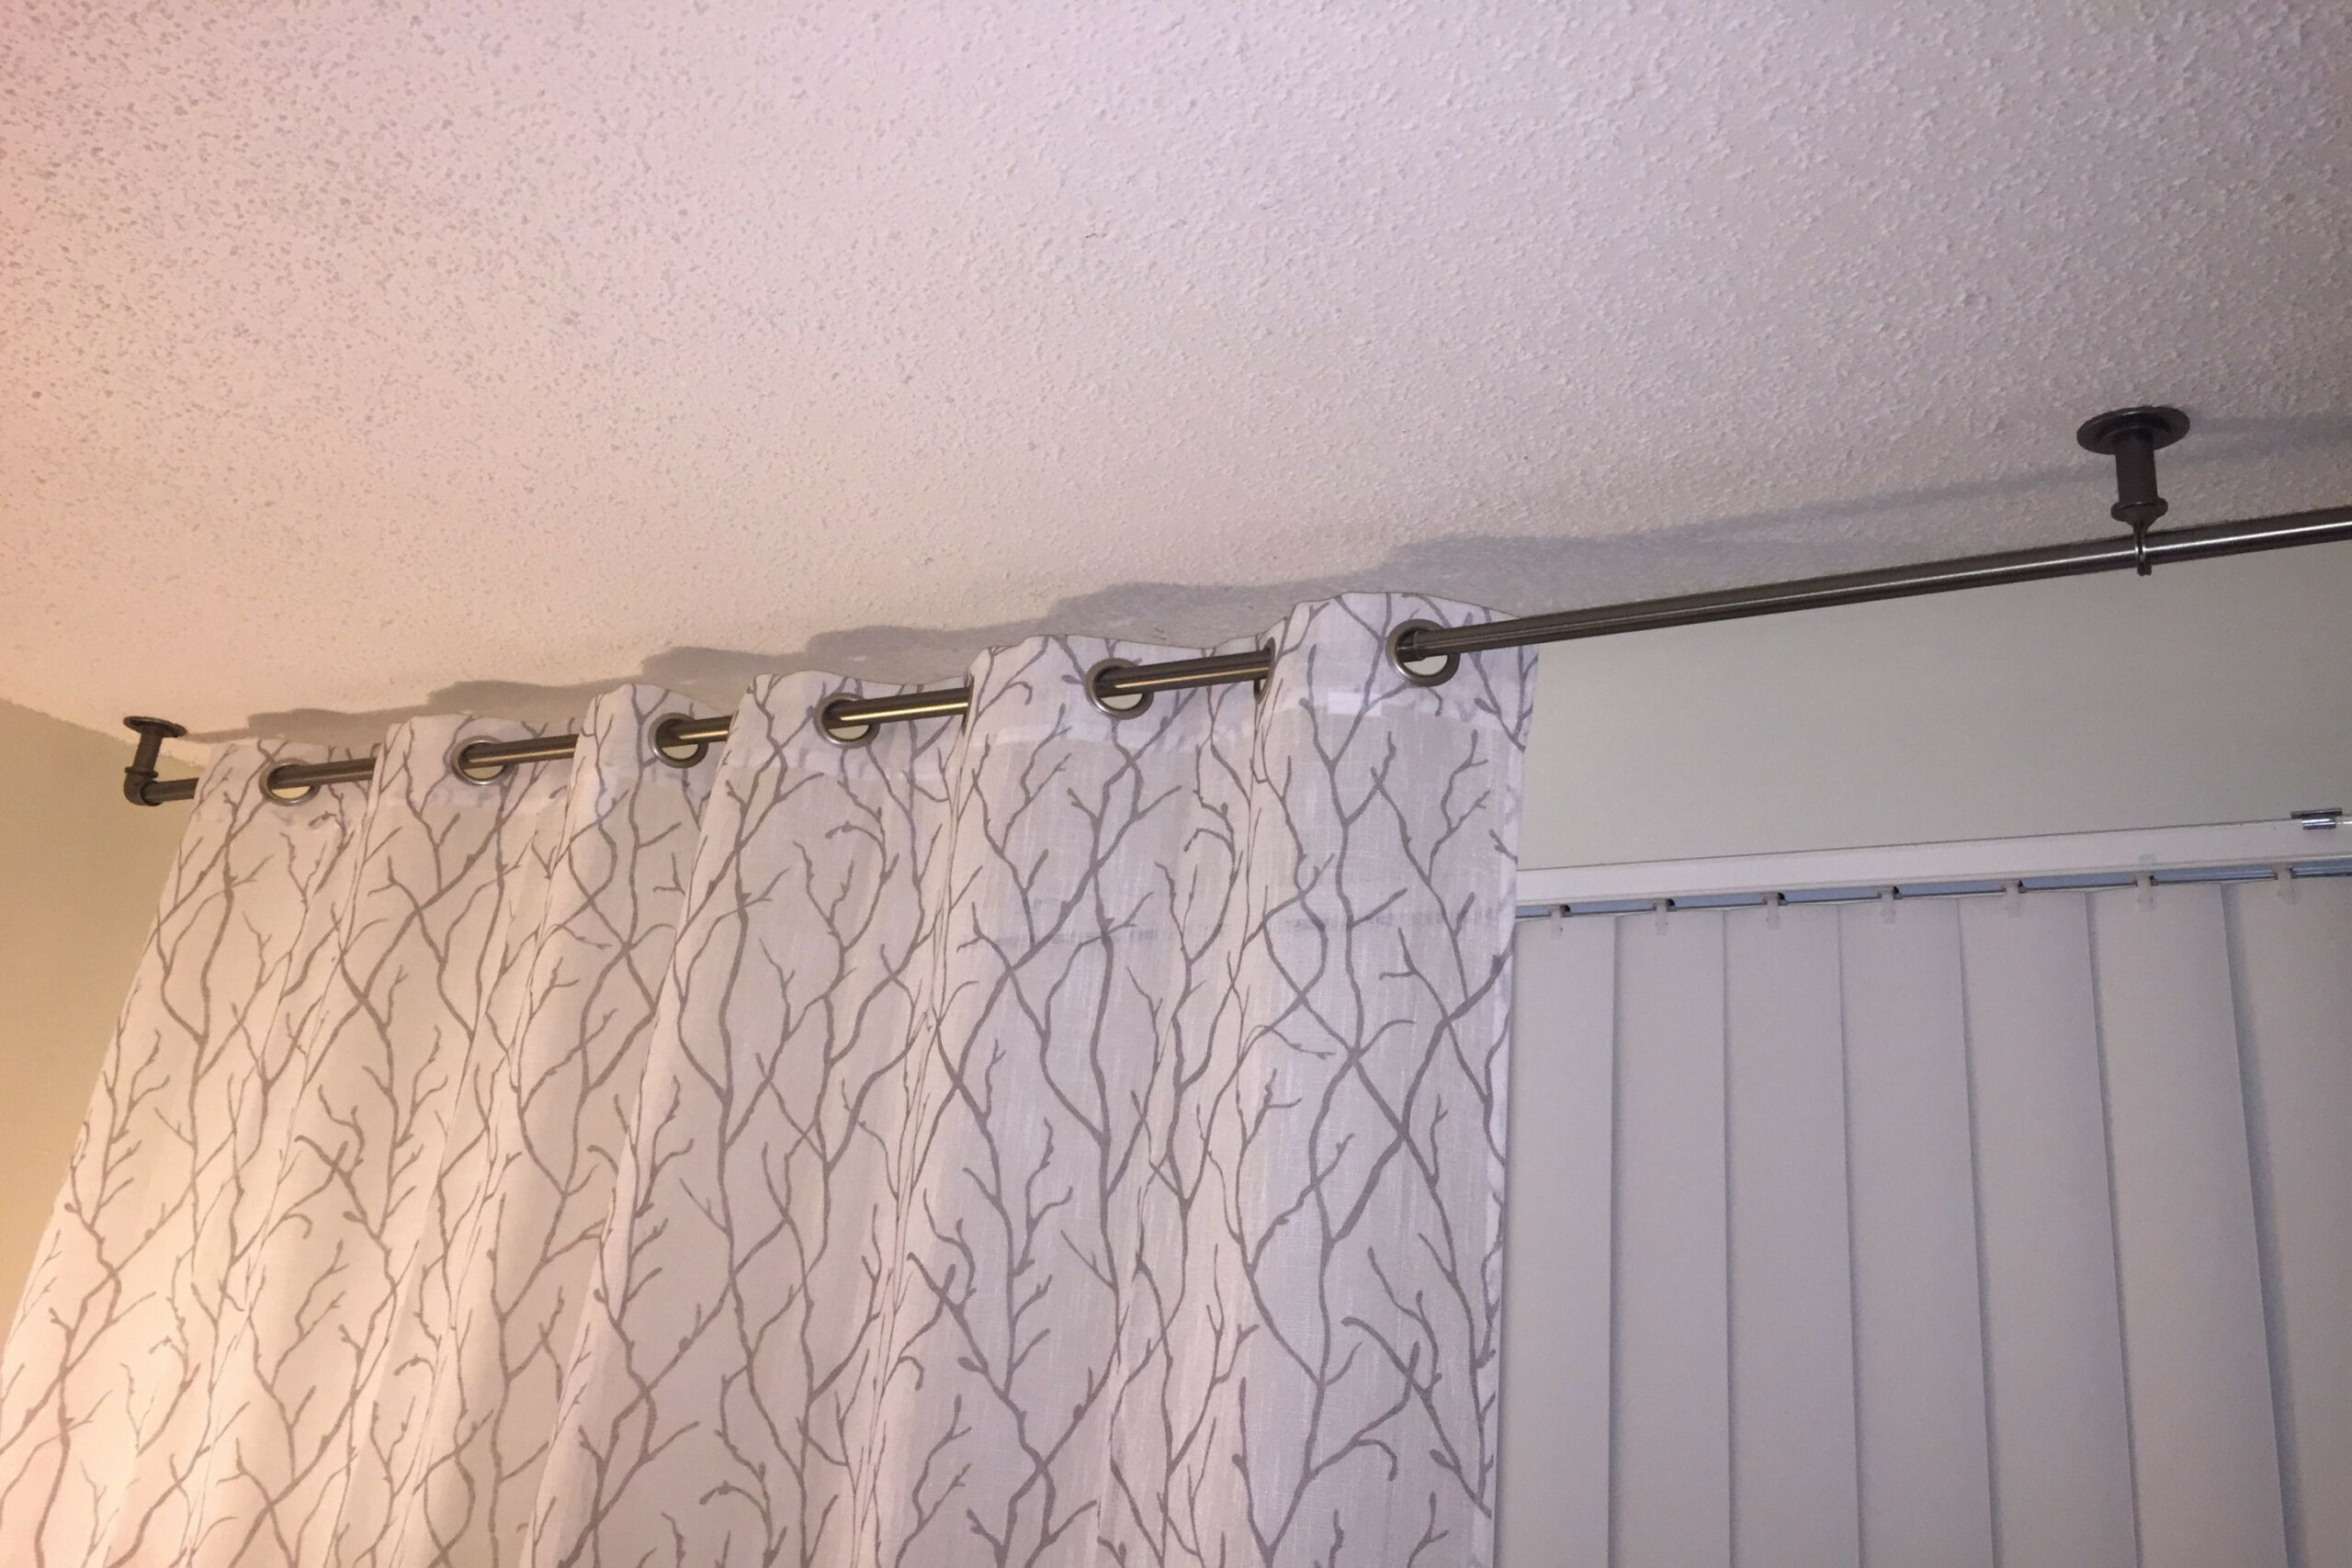 Need drapes to hang over vertical blinds? Mount rod to ceiling